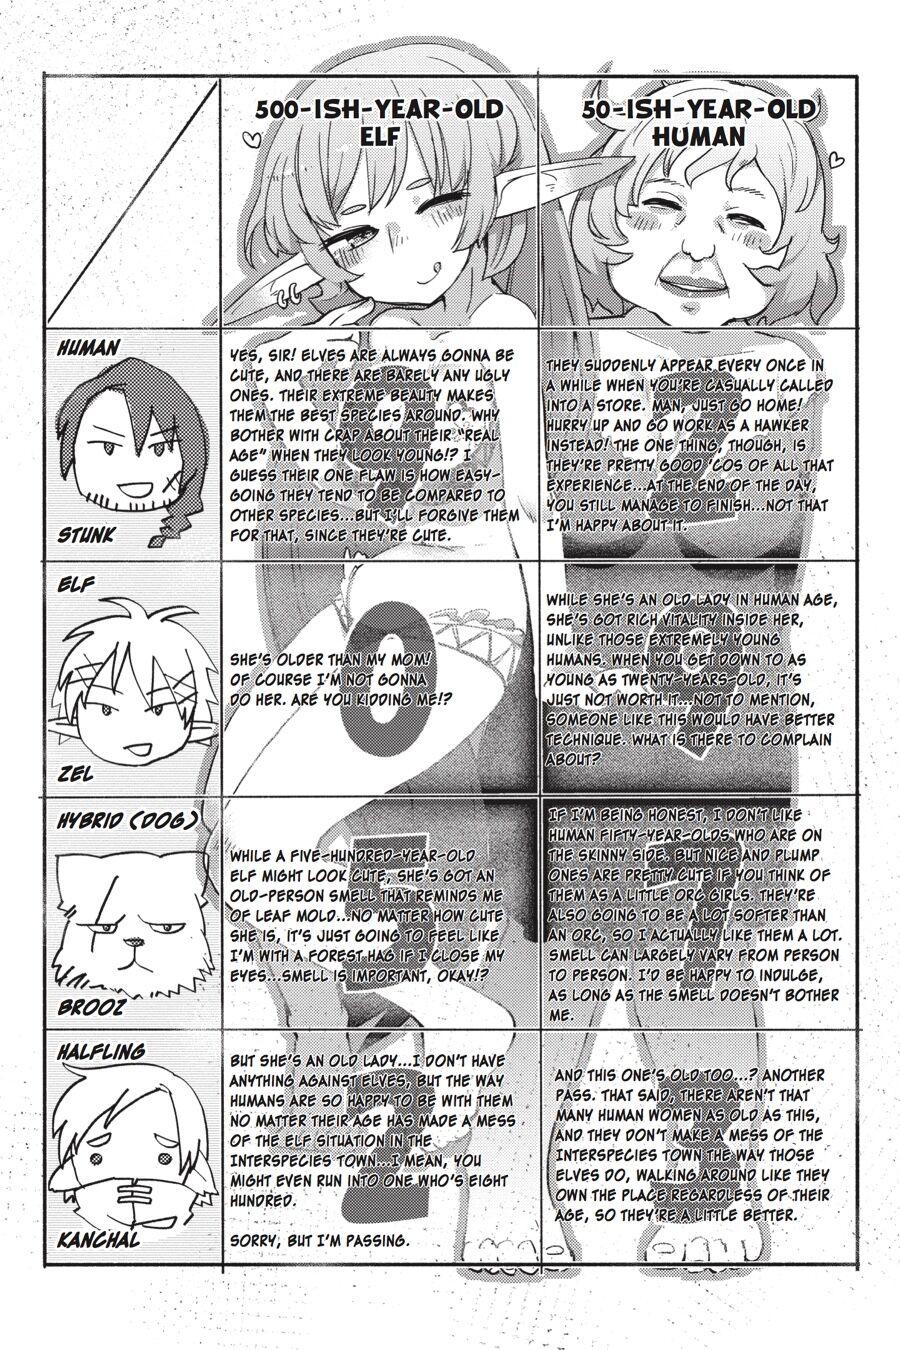 Bhabi Interspecies Reviewers - Volume 1 - Ishuzoku reviewers Candid - Page 11